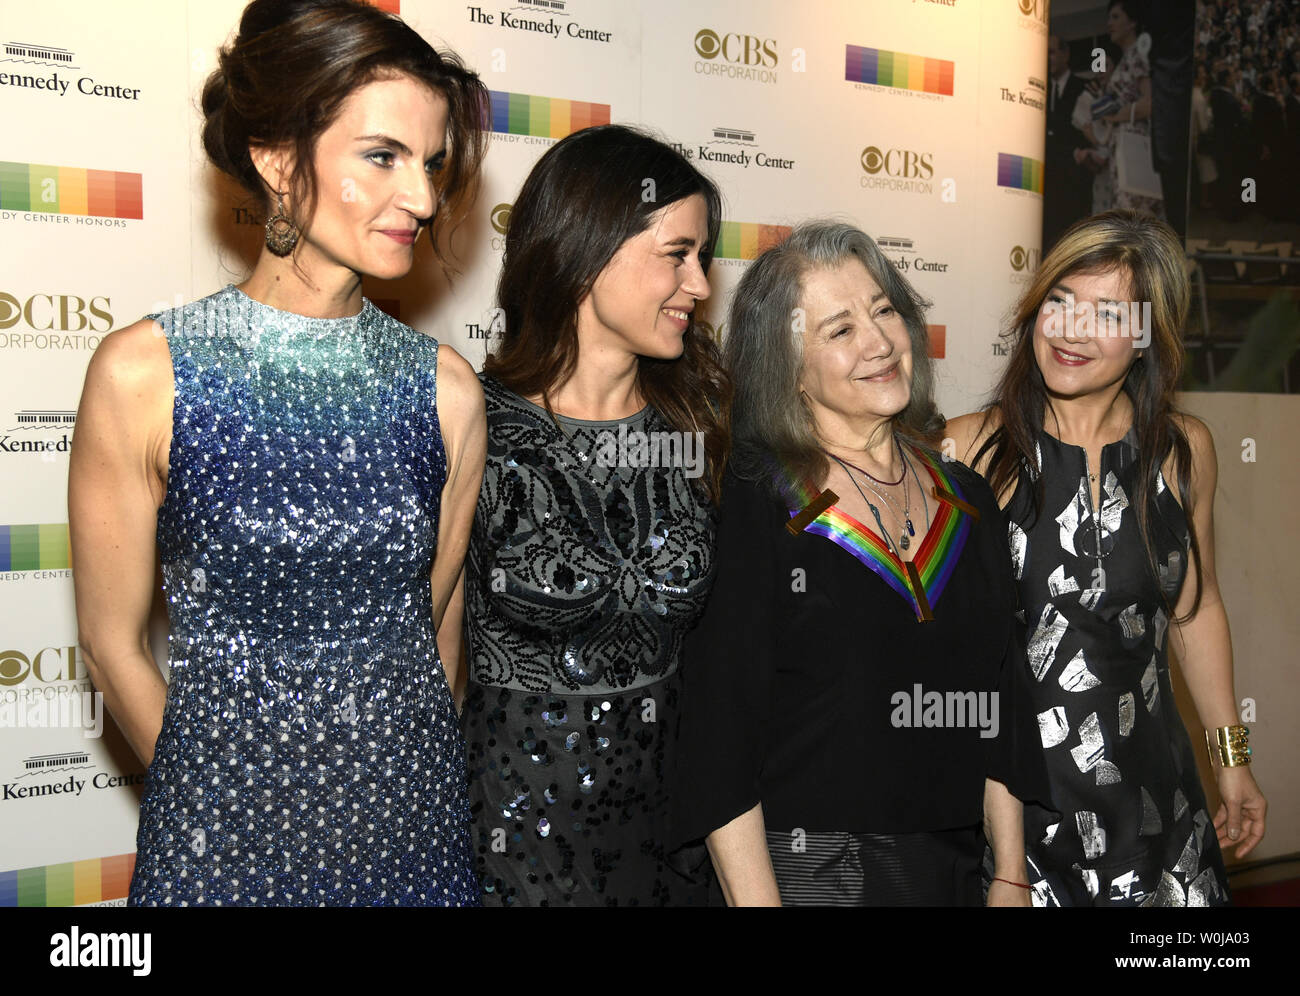 2016 Kennedy Center Honoree Argentine-born pianist Martha Argerich (2nd,R) poses for photographers with her daughters (L-R) Anne Catherine Dutoit, Stephanie Argerich and Lyda Chen on the red carpet as they arrive for an evening of gala entertainment at the Kennedy Center, December 4, 2016, in Washington, DC.  The Honors are bestowed annually on five artists for their lifetime achievement in the arts and culture.    Photo by Mike Theiler/UPI Stock Photo